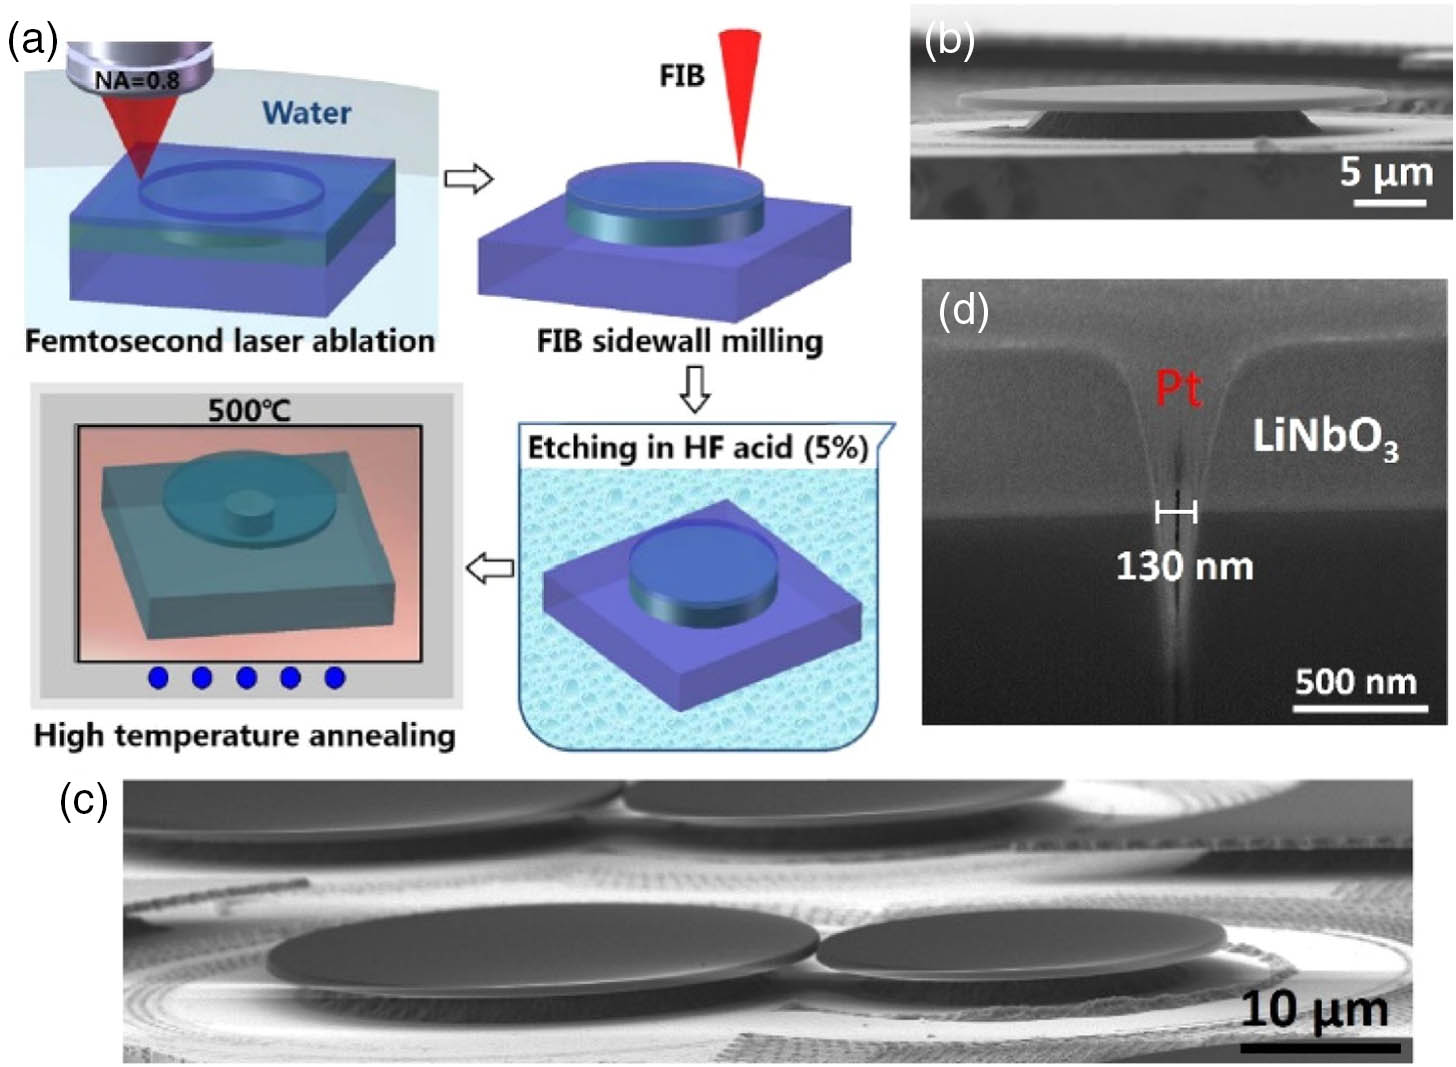 Microresonators fabricated by femtosecond laser ablation and FIB polishing: (a) schematic illustration of the process flow of the fabrication [35,39]; (b) SEM image of a single microdisk with Q of 9.61×106 [51] showing smooth sidewall and surface; (c) SEM image of a coupled double-microdisk with 123 nm gap [109]; and (d) enlarged SEM image of the coupled region coated with platinum (Pt) for imaging.